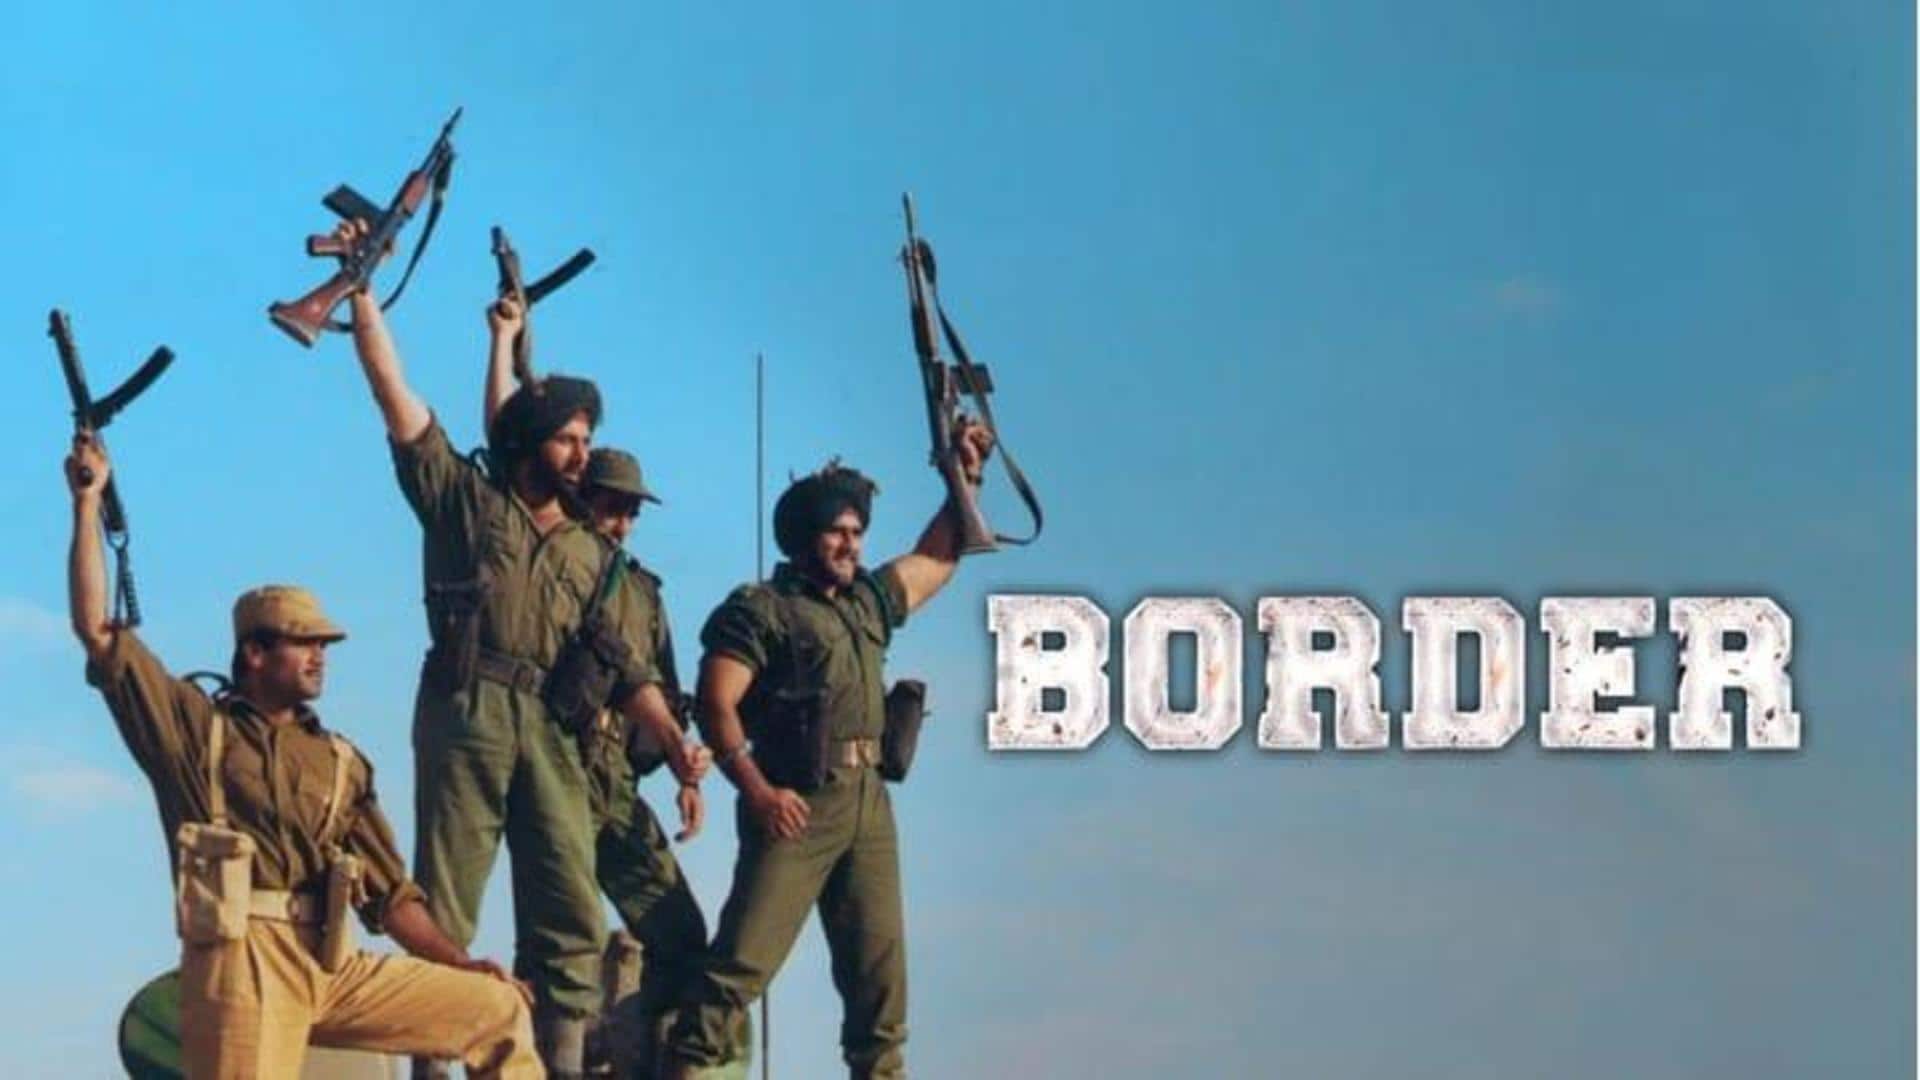 Sunny Deol's 'Border 2' not happening? Latest reports rubbish rumors